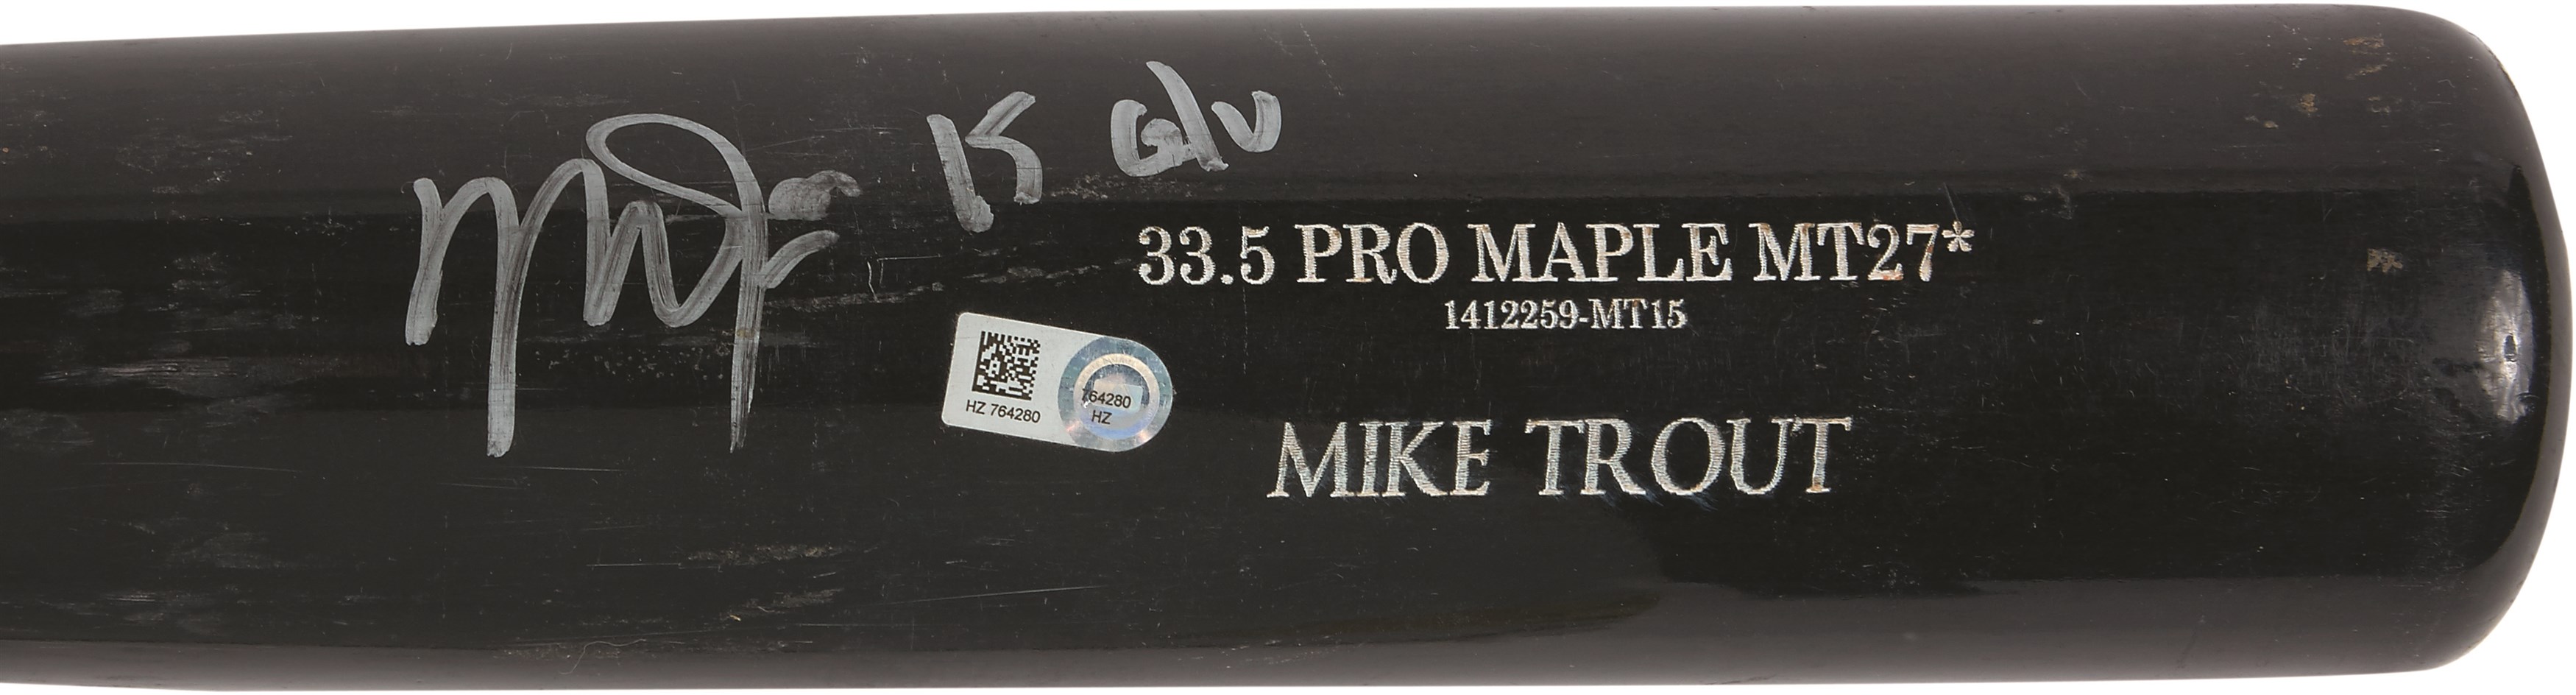 2015 Mike Trout Signed Game Used "Shattered" Bat (MLB Auth., Video Proof, Photo-Matched)